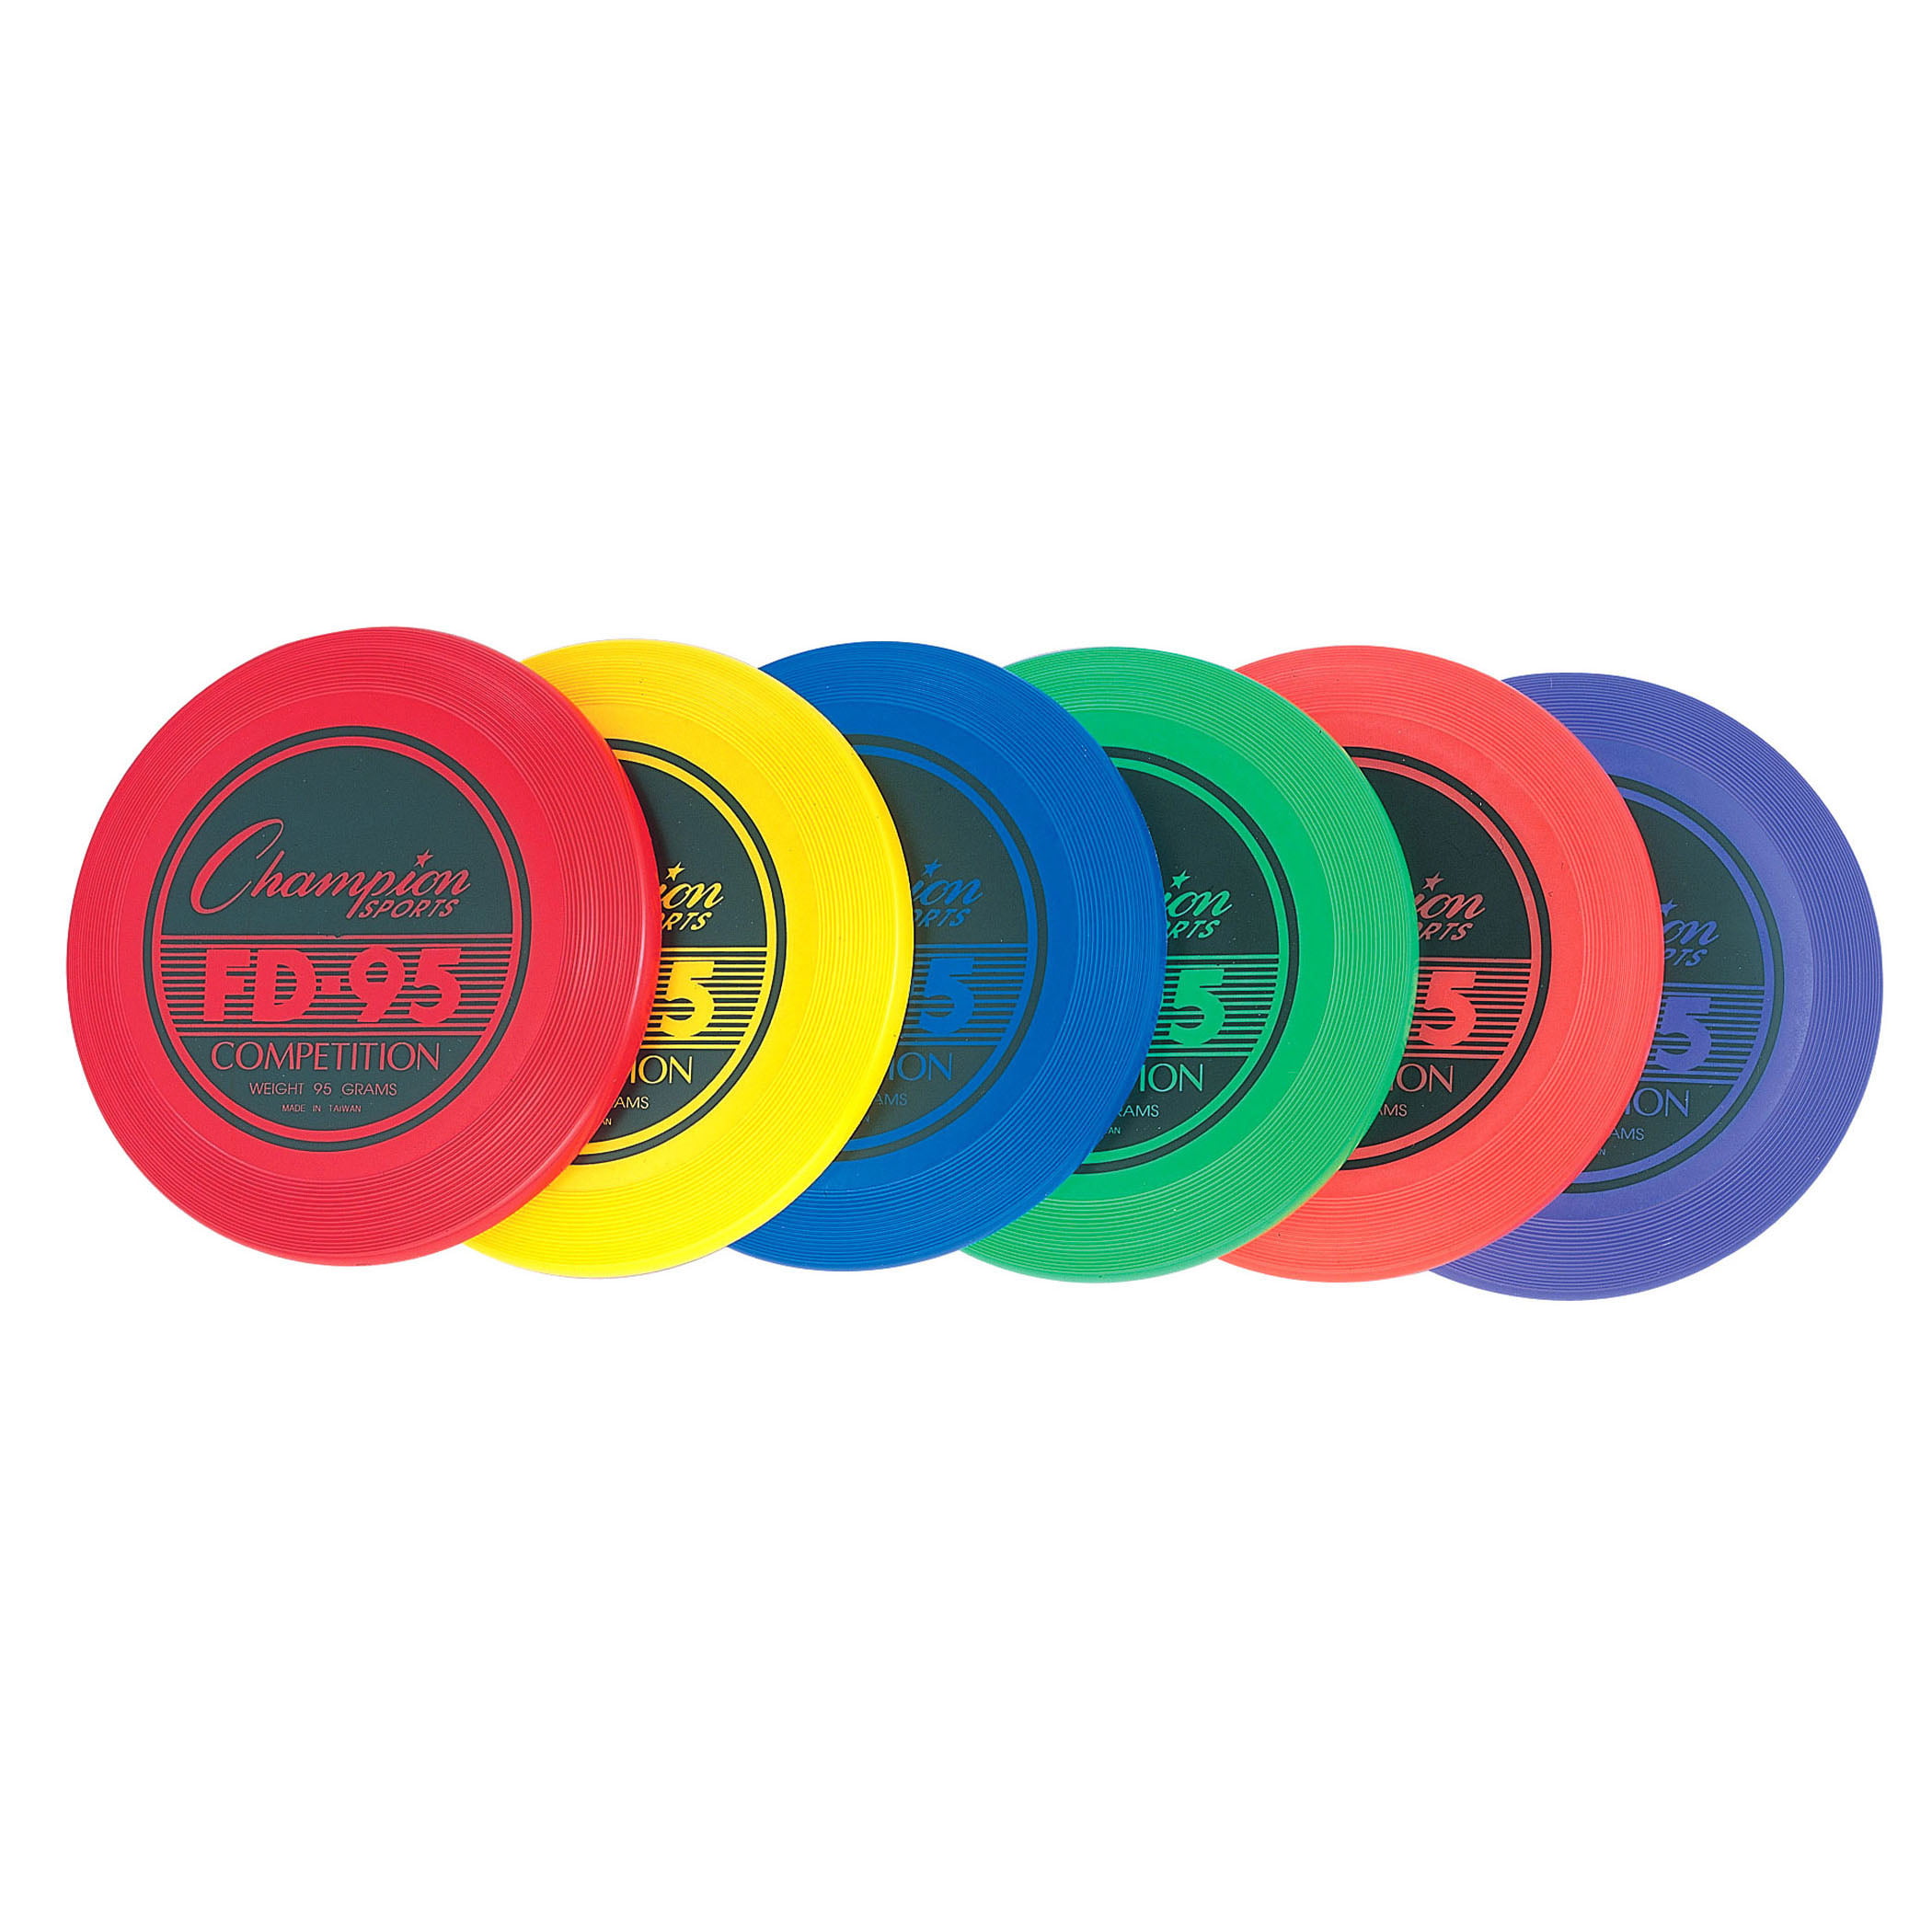 pack of 2 Plastic Ultimate Frisbee Disc 